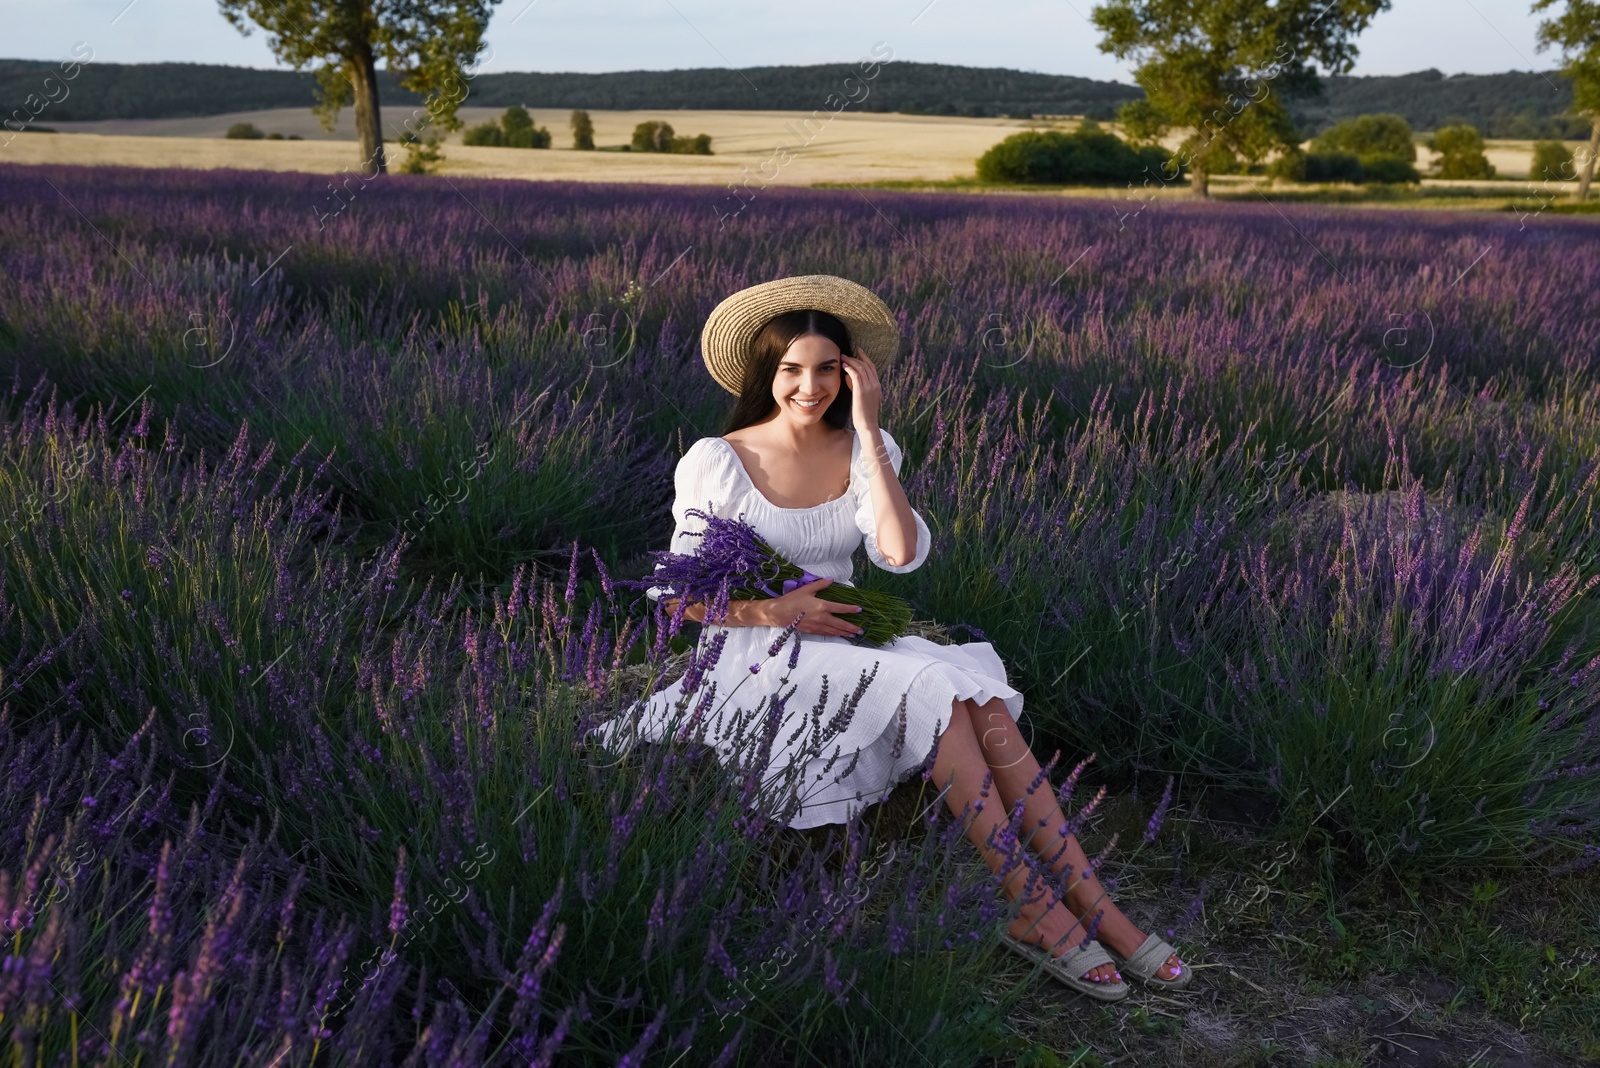 Photo of Beautiful young woman sitting in lavender field at sunset